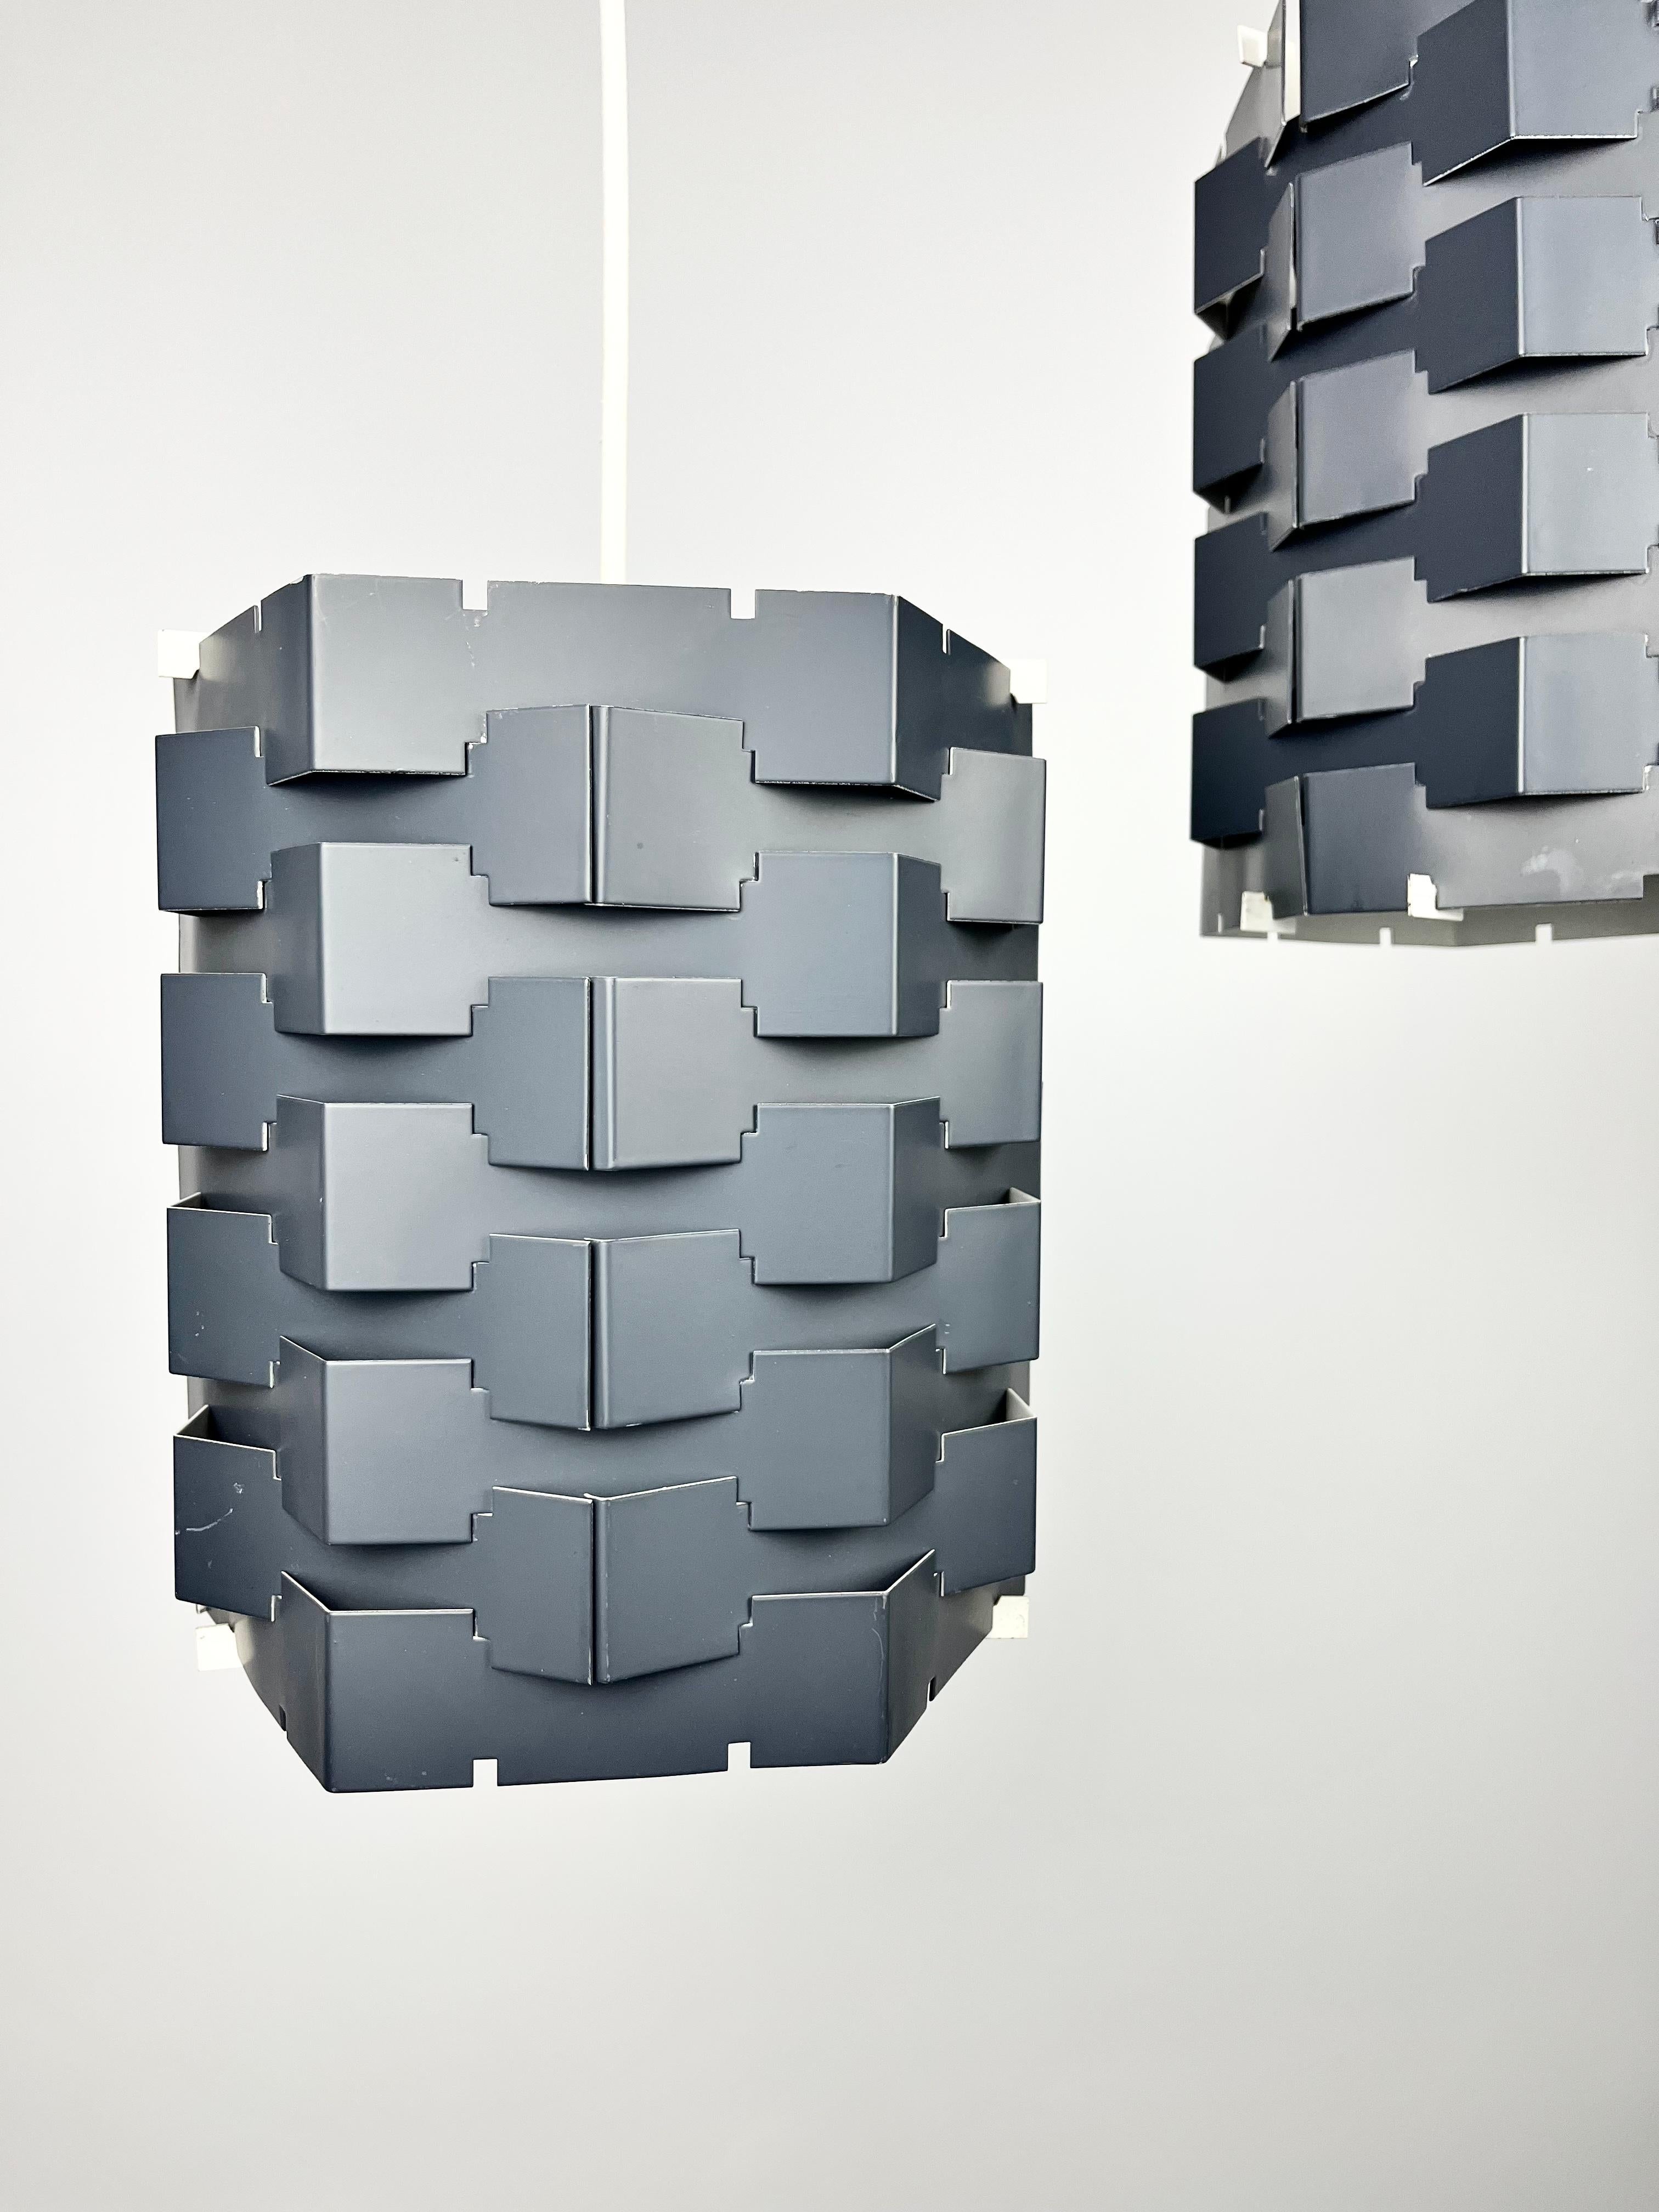 This awesome pair of original mid century light shades have a particularly architectural look to them!
Dating from the 1960s, they’re constructed from sheet metal which has been cut into interlocking sections and slotted together to create this